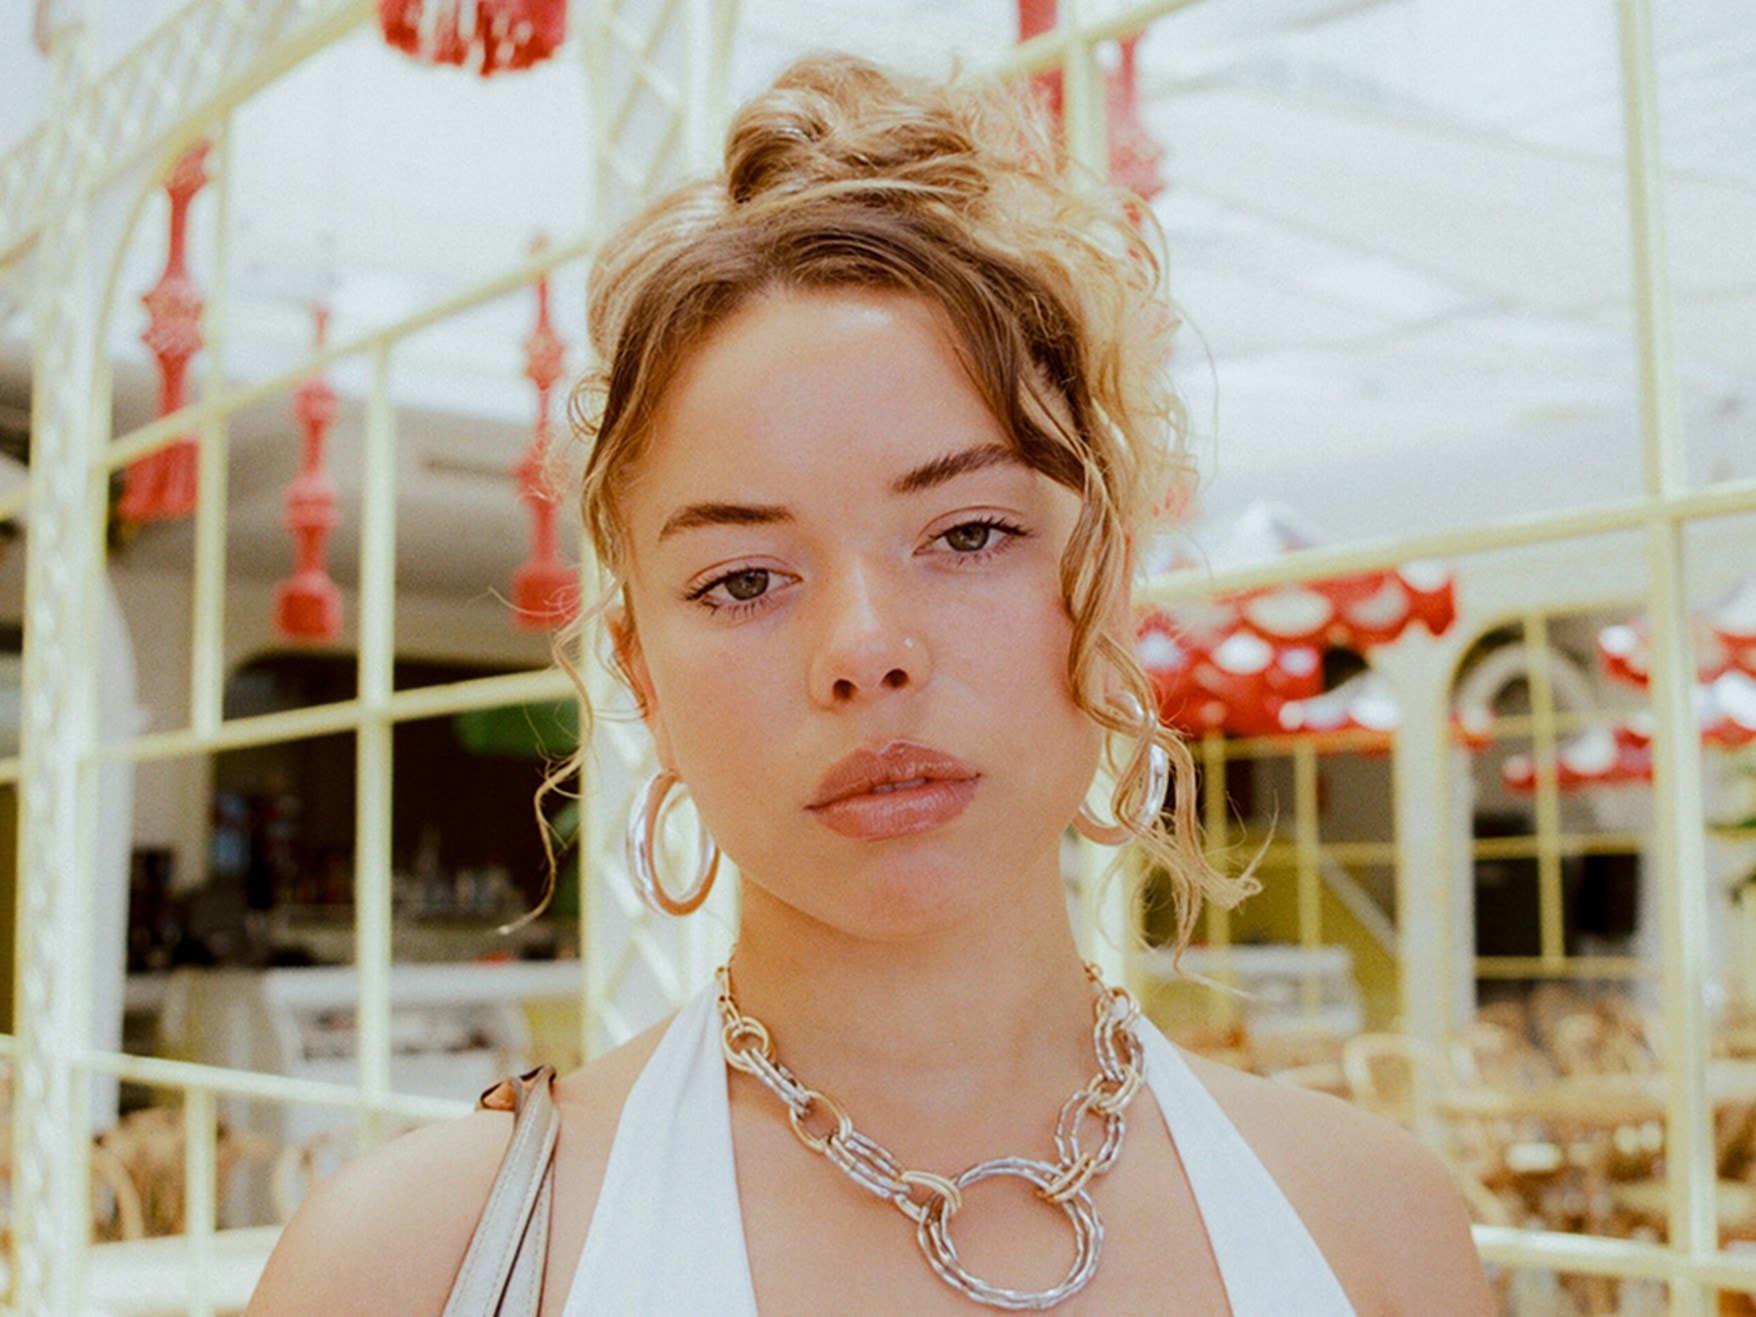 Meet Nilufer Yanya for an exclusive album signing event